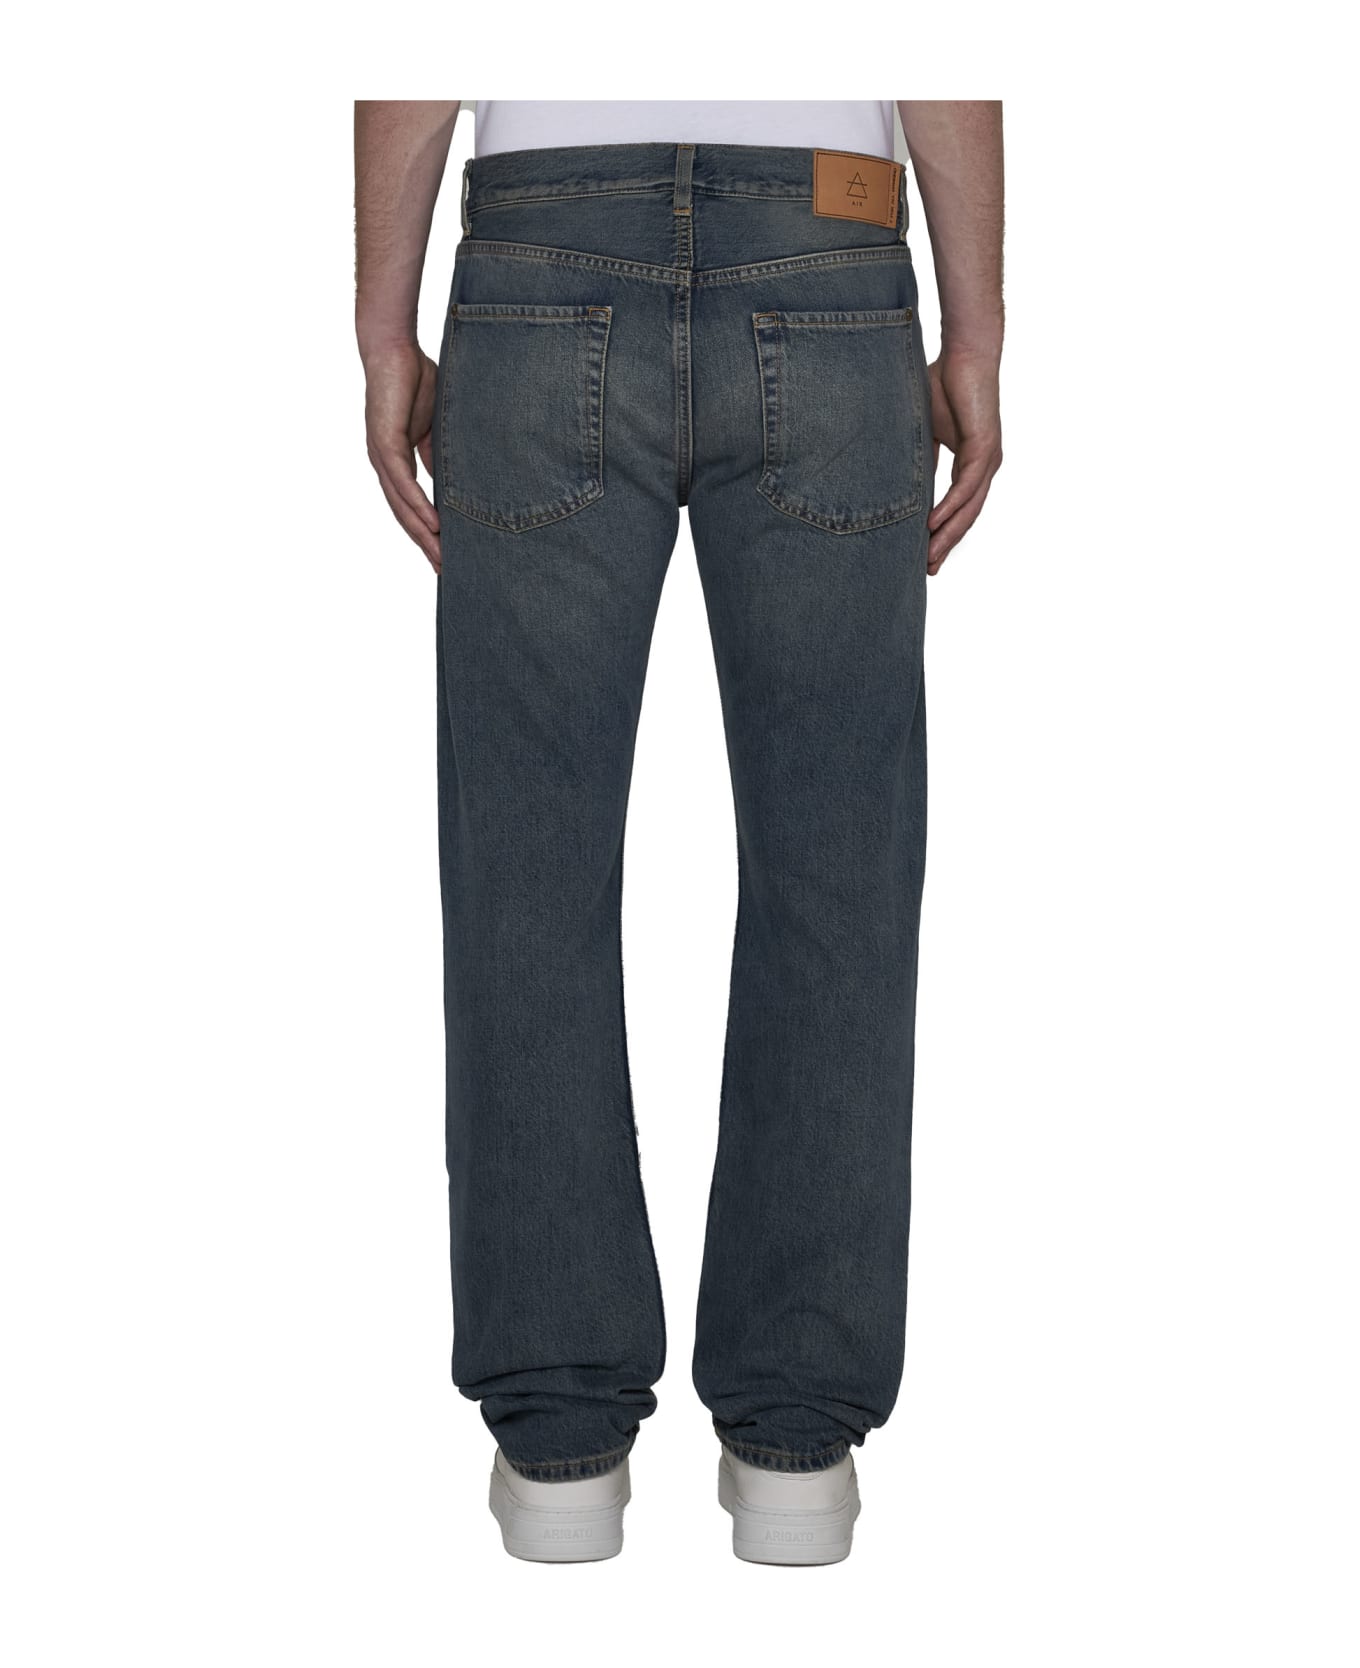 7 For All Mankind Jeans - Mid blue デニム